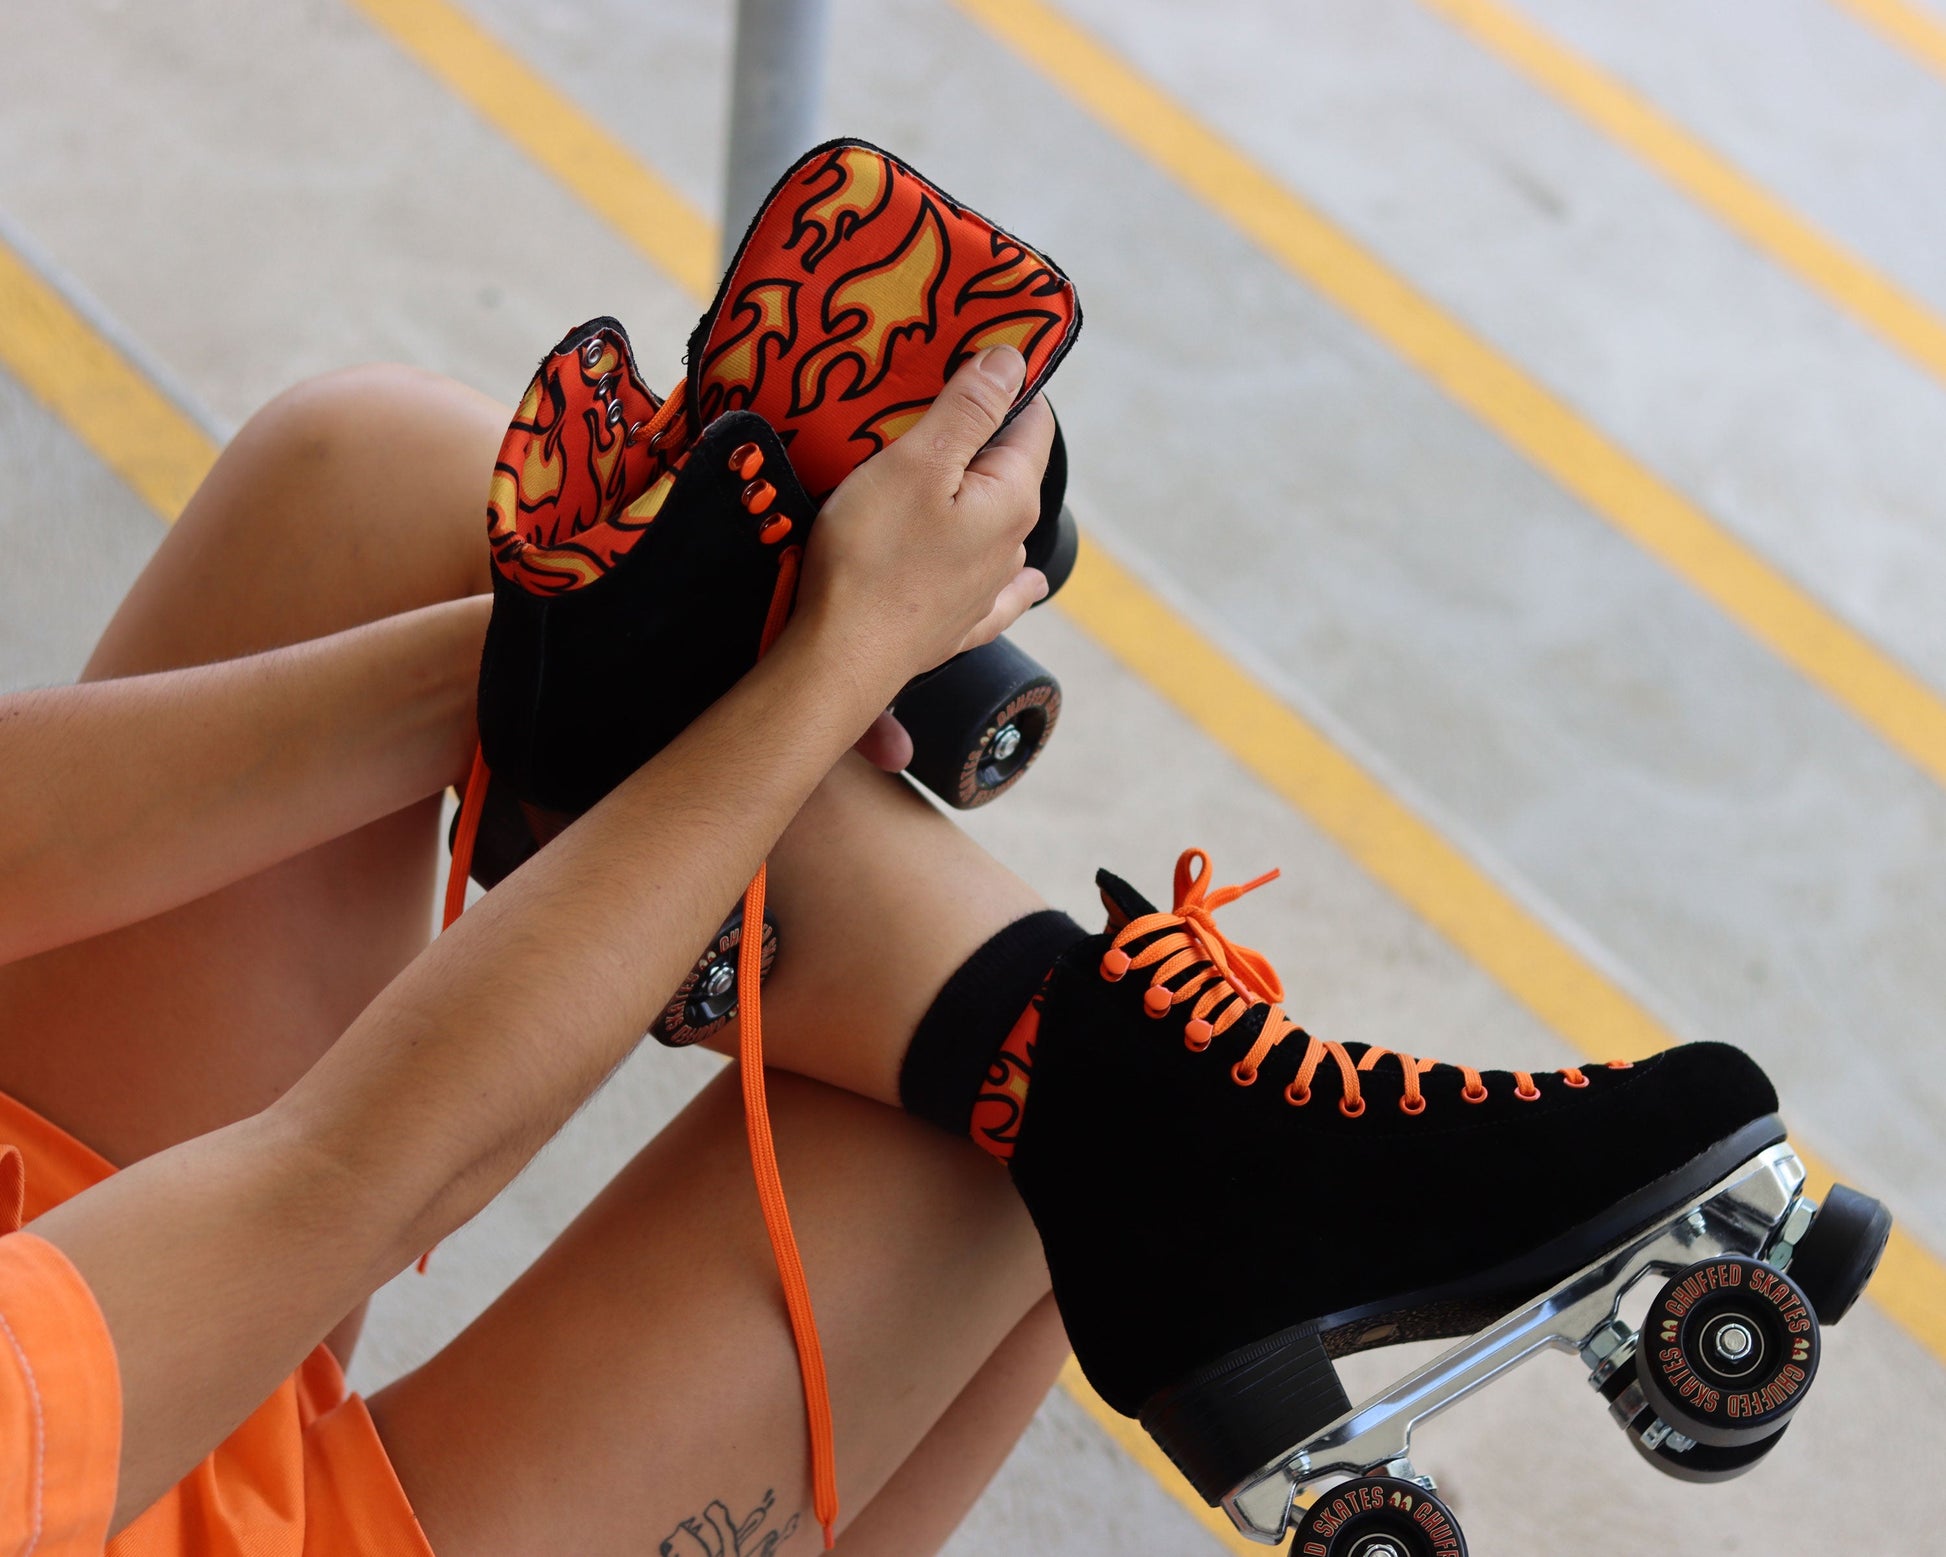 Chuffed Skates black roller skates inside lining with fire print pattern